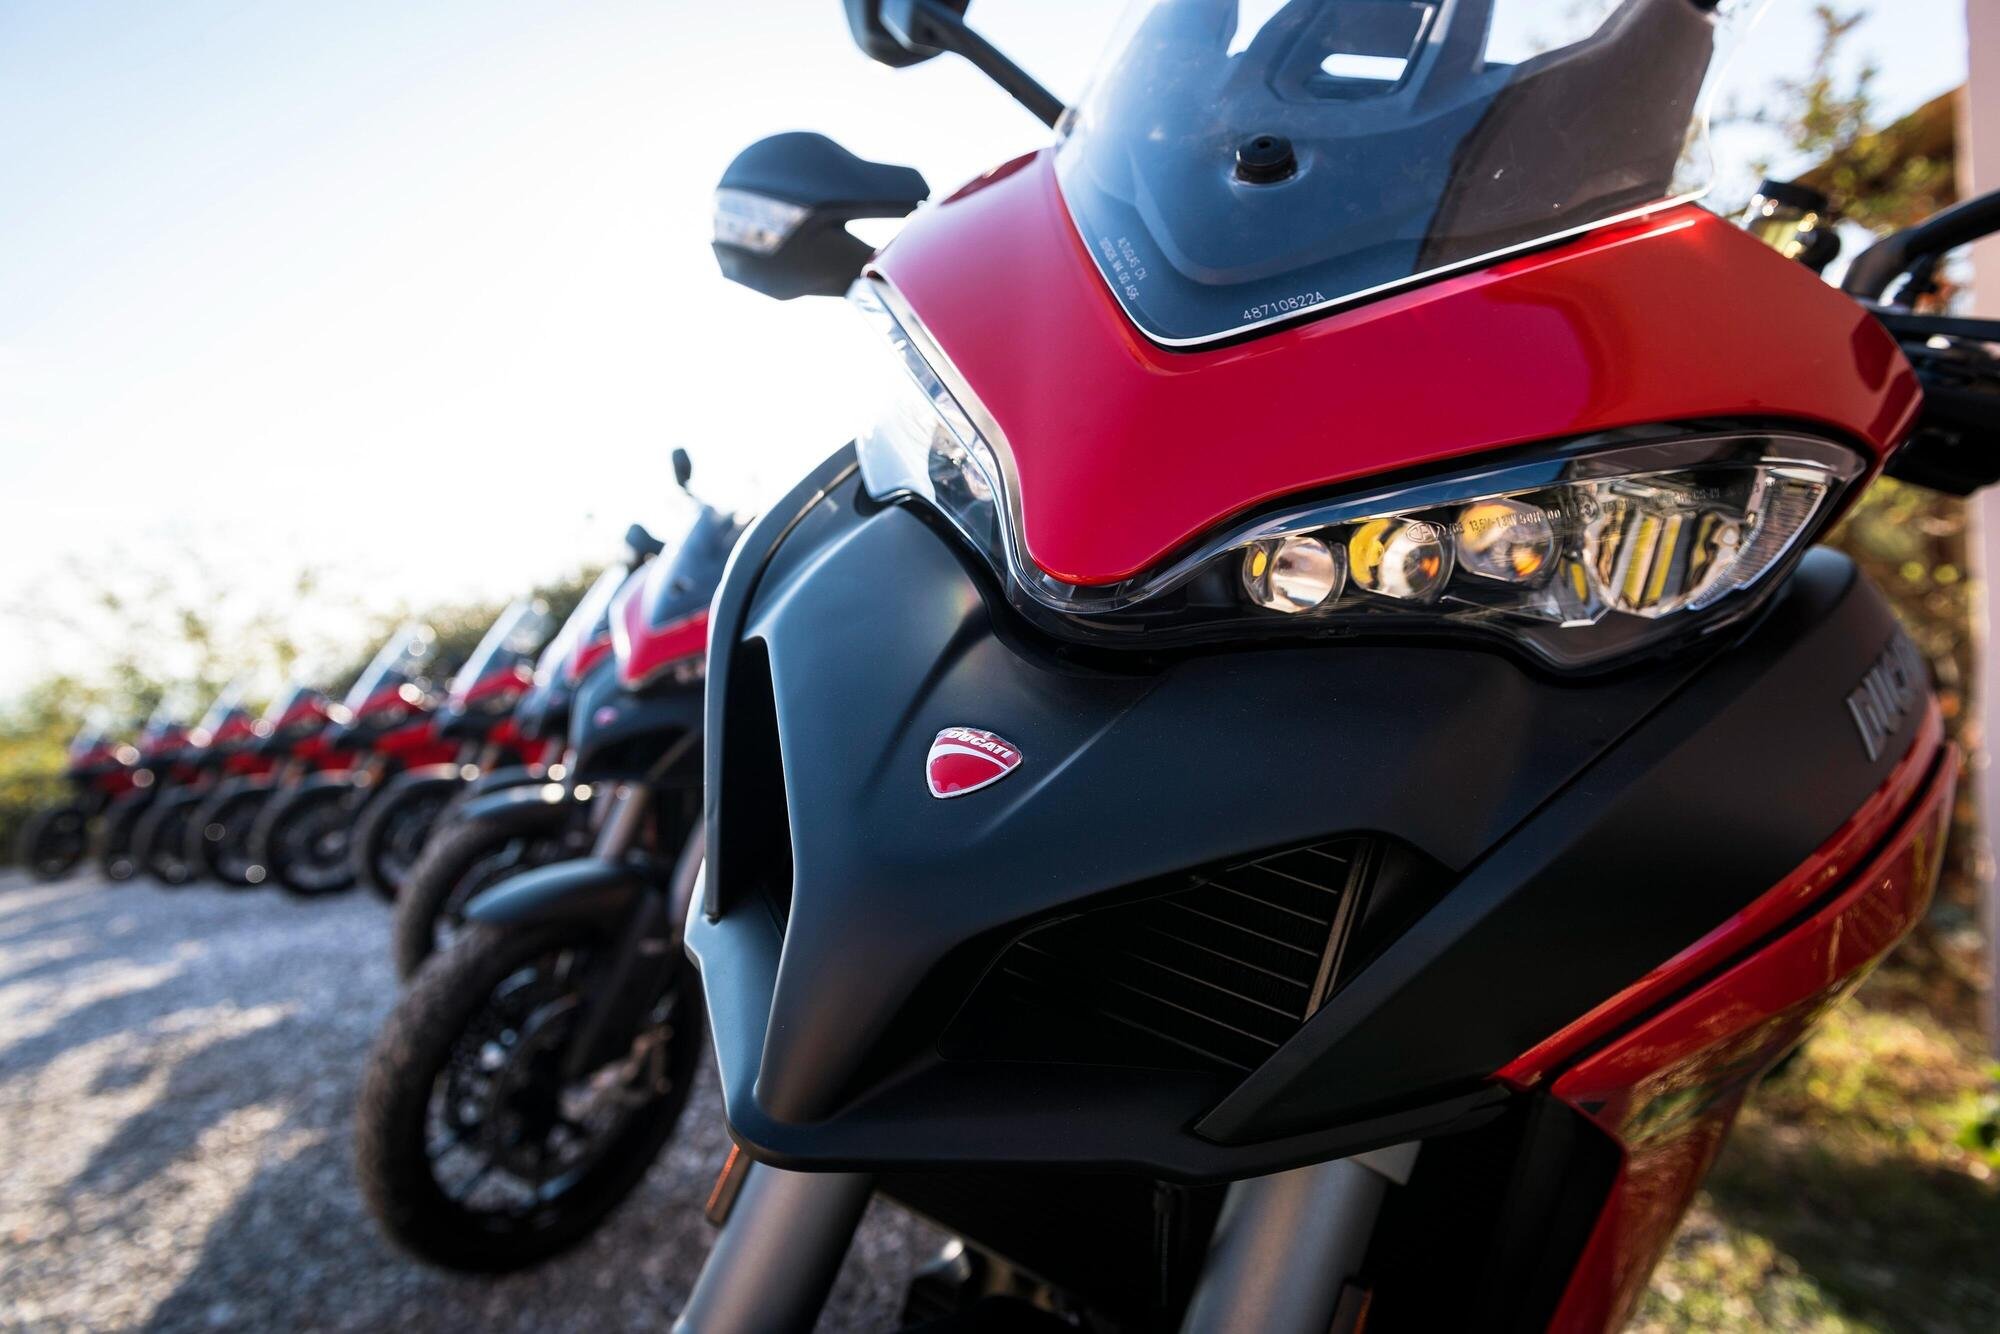 Ducati Multistrada: the style in its story - MotoFestival 